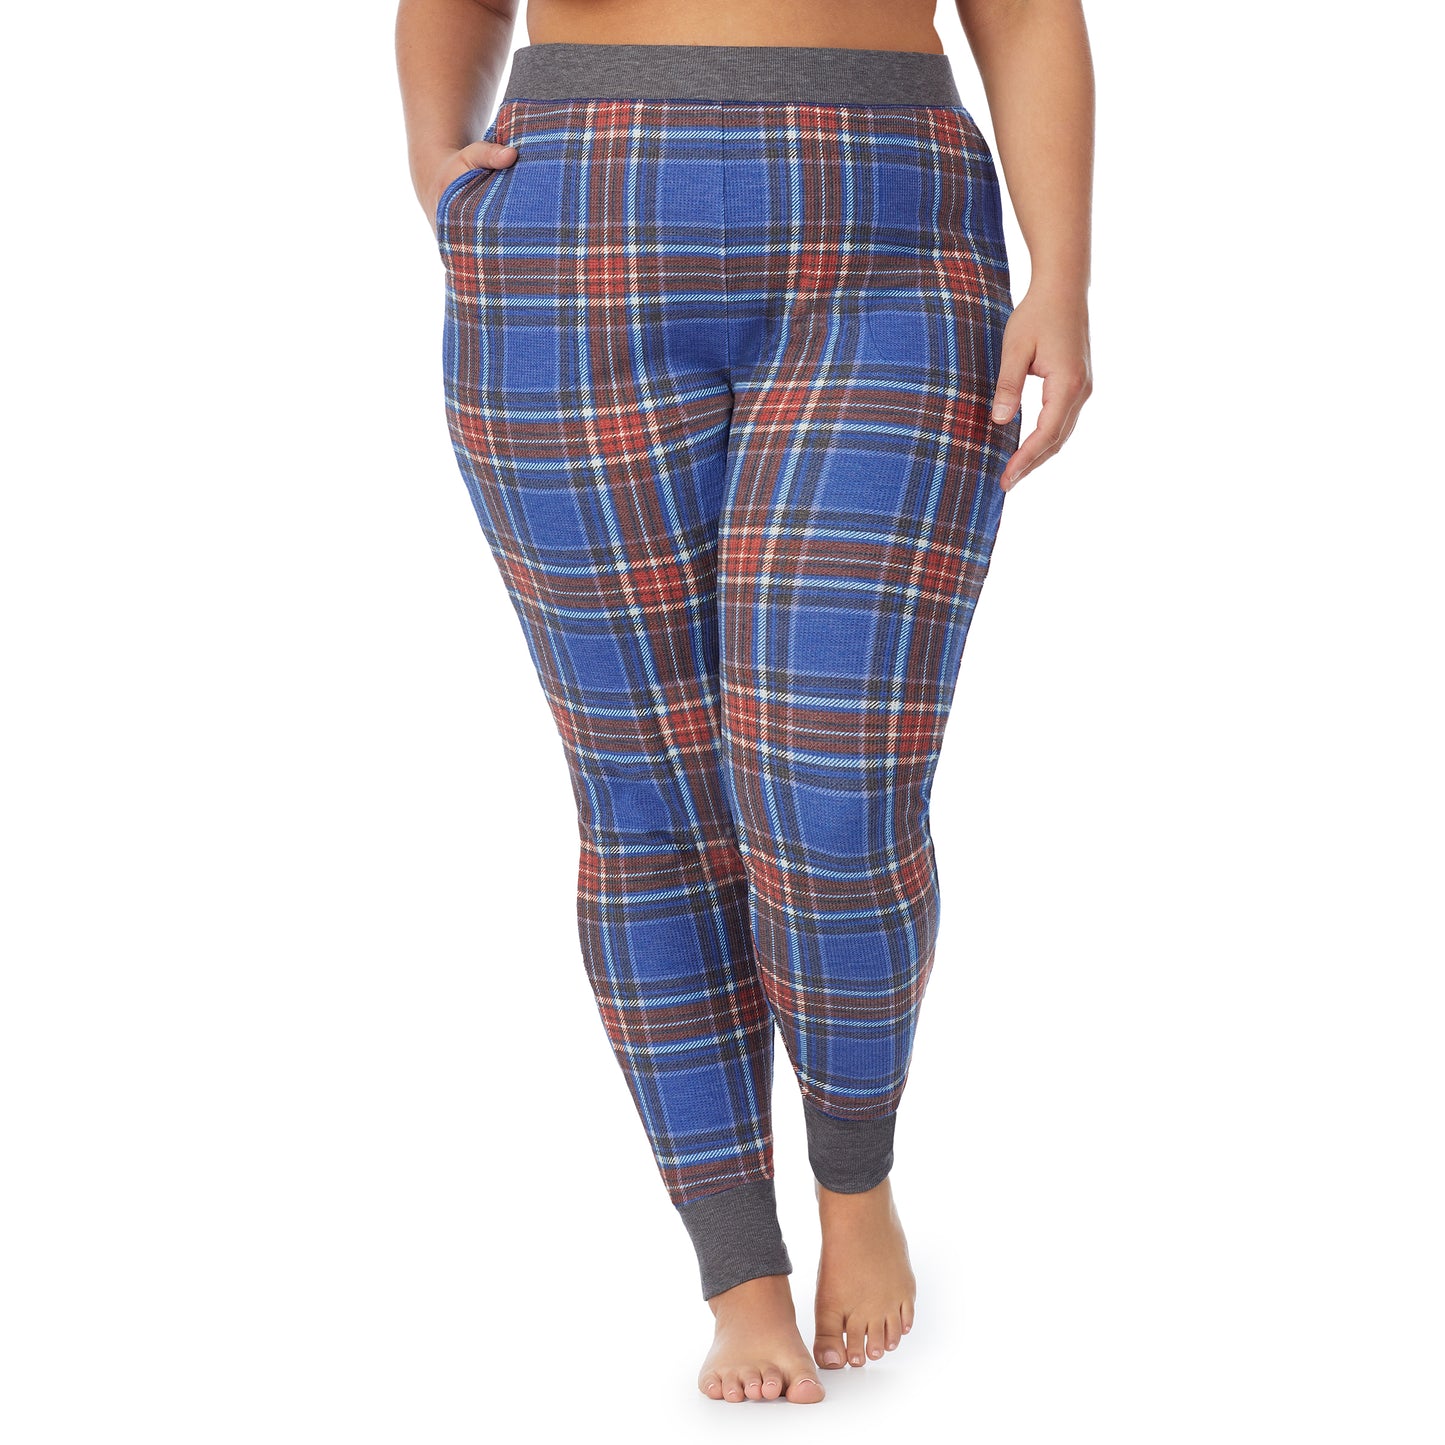 Red Blue Plaid; Model is wearing size 1X. She is 5'9", Bust 38", Waist 36", Hips 48.5".@A lady wearing a red blue plaid legging plus.